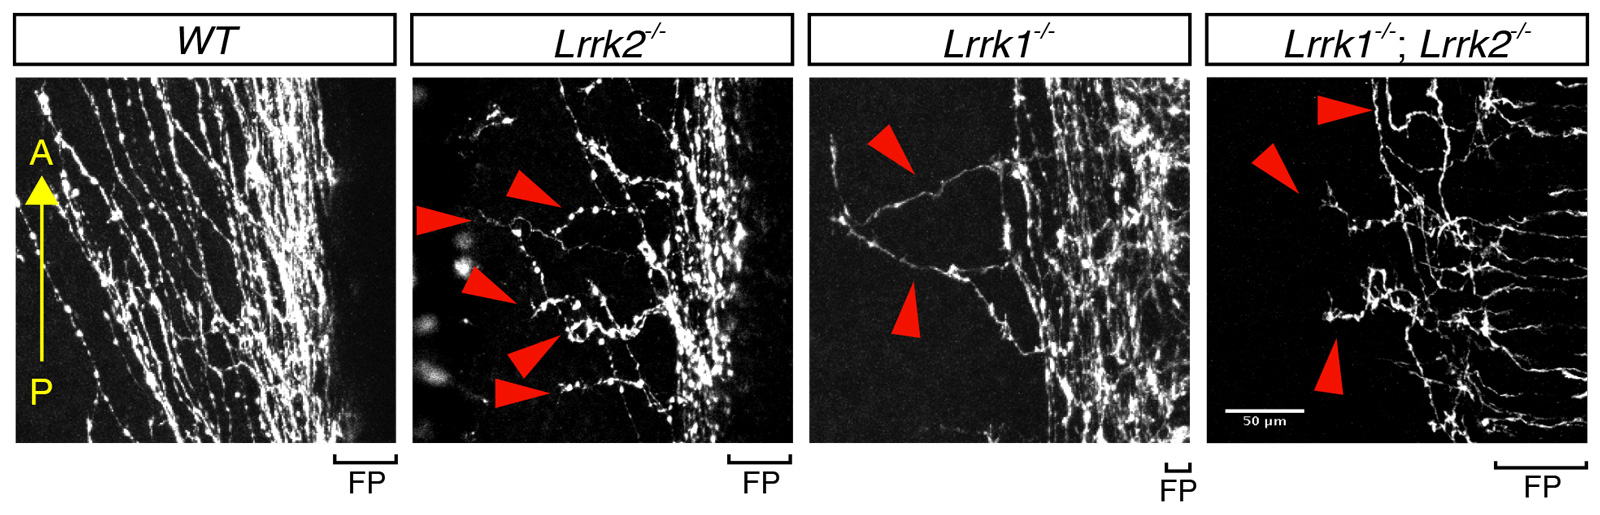 A set of neuronal images show missing spinal cord axons in cases missing LRRK genes versus normal growth of cases with LRRK genes.